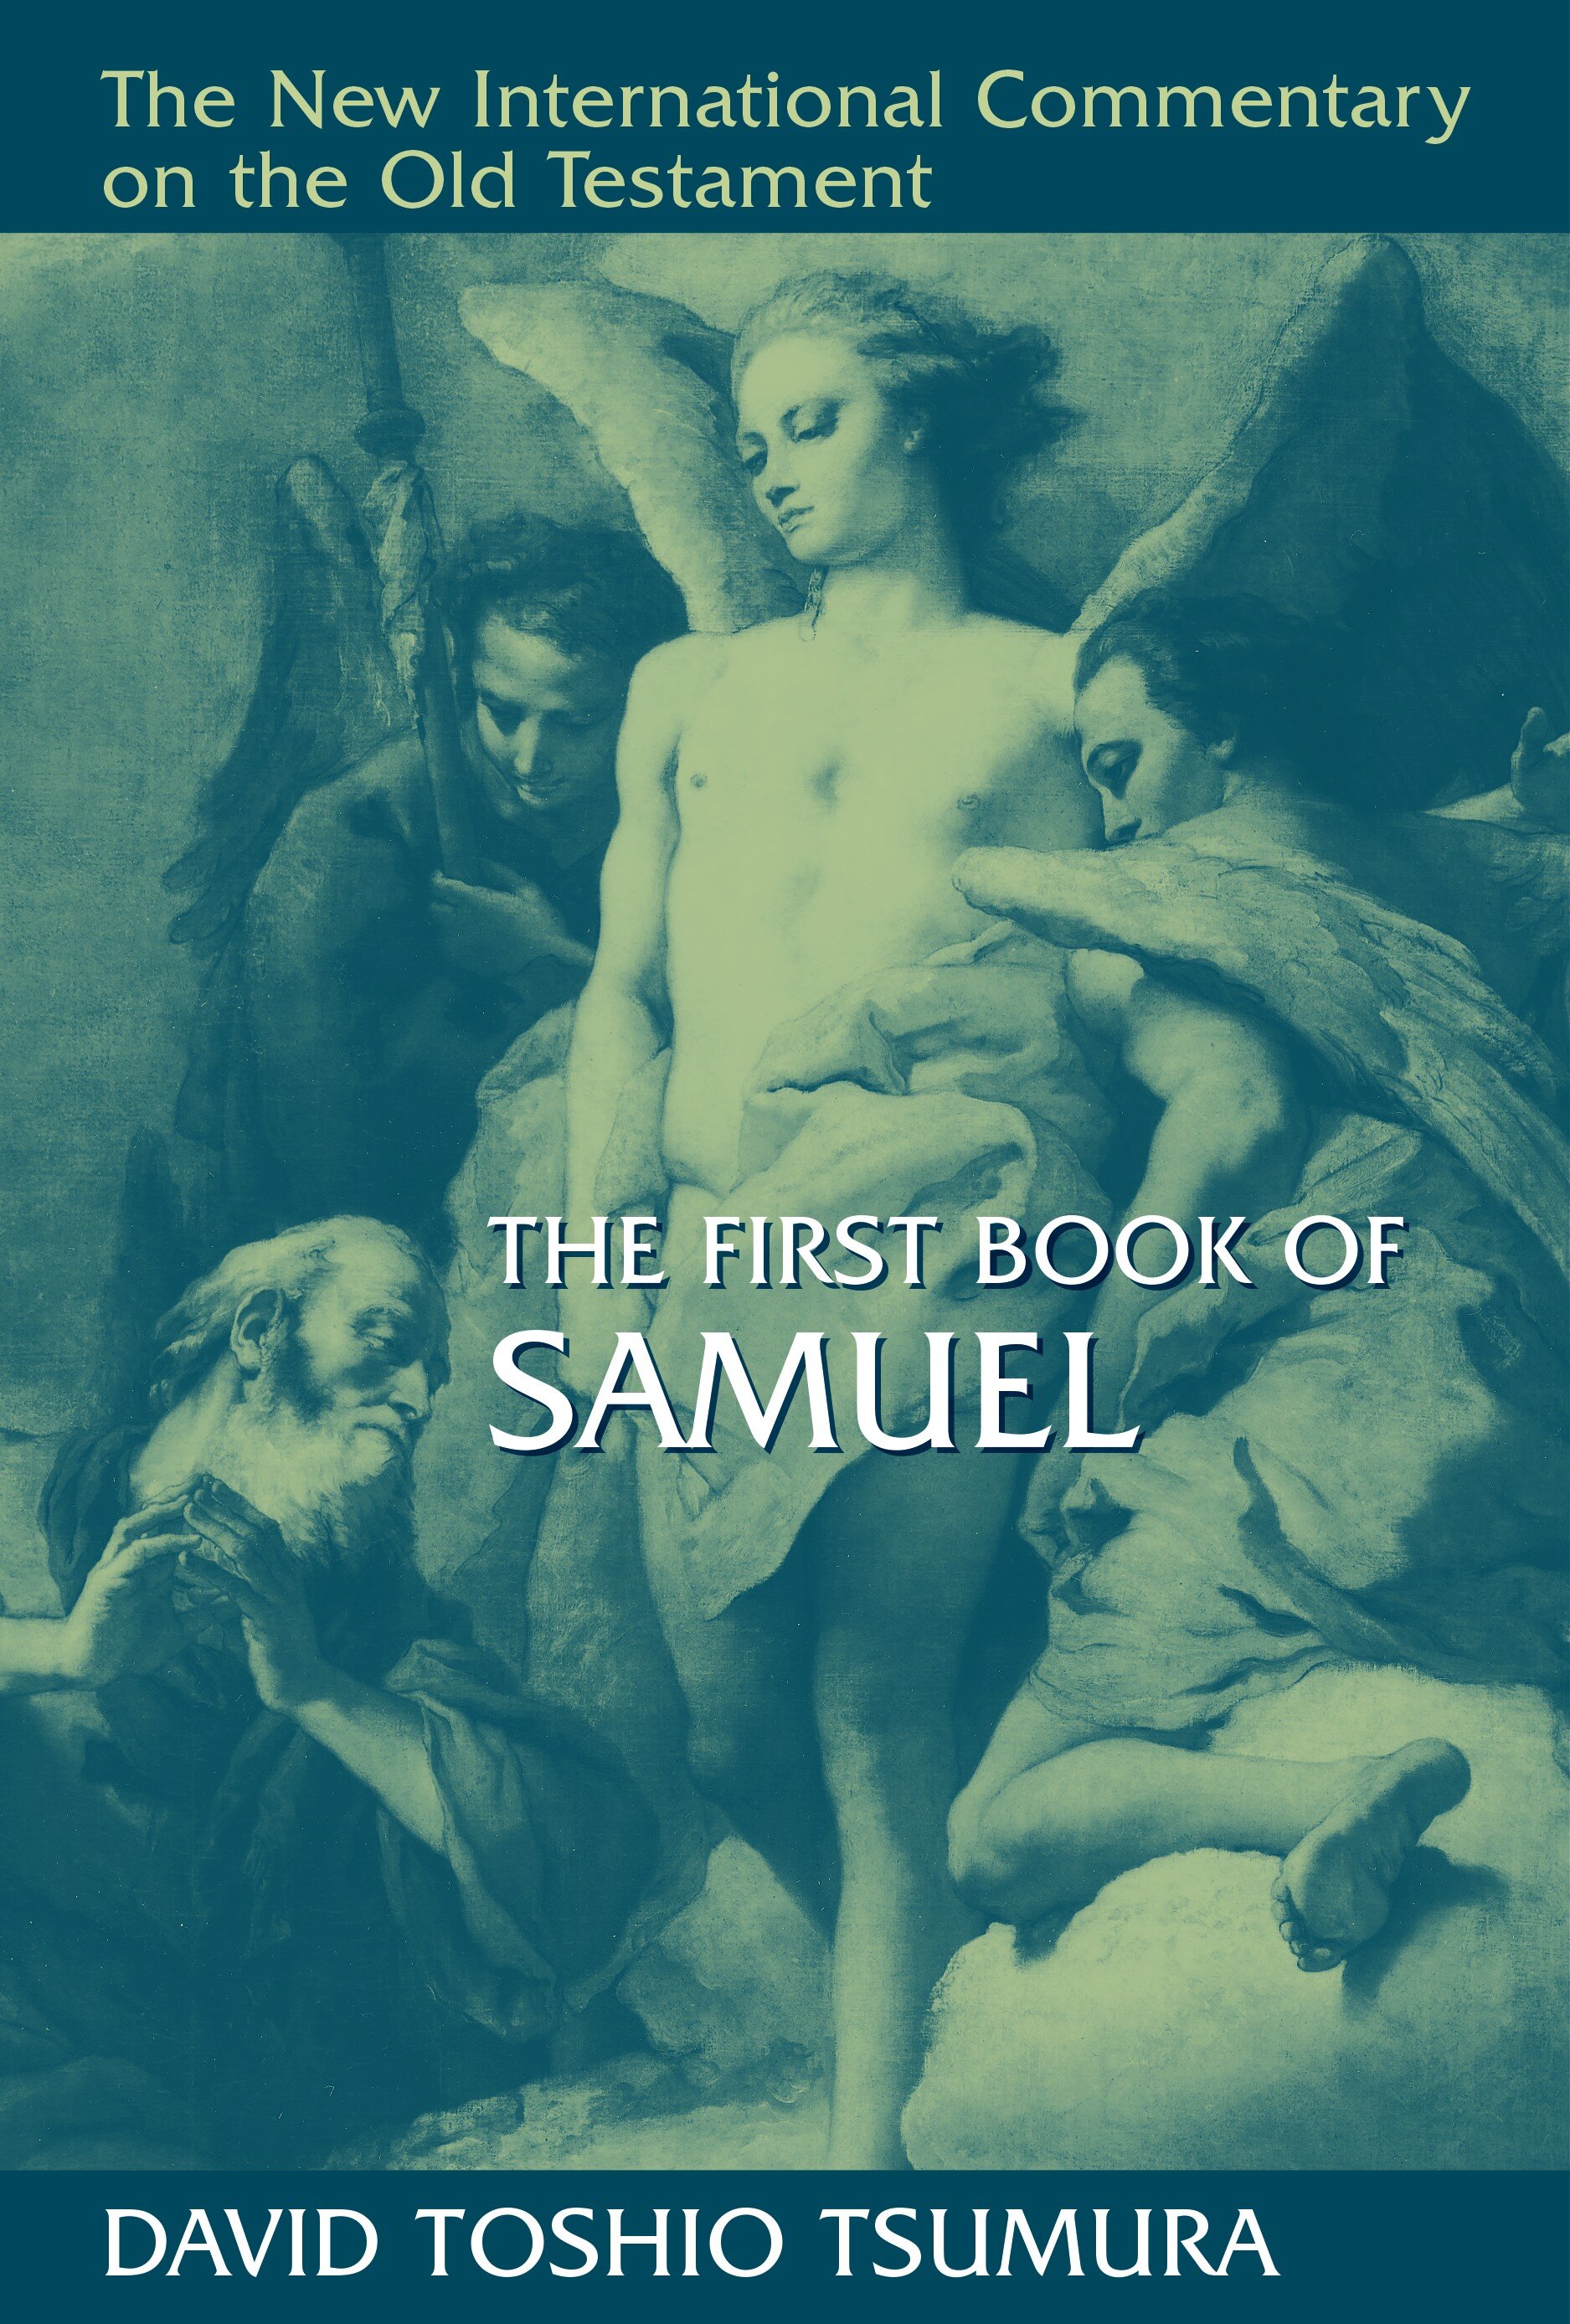 The First Book of Samuel (The New International Commentary on the Old Testament | NICOT)